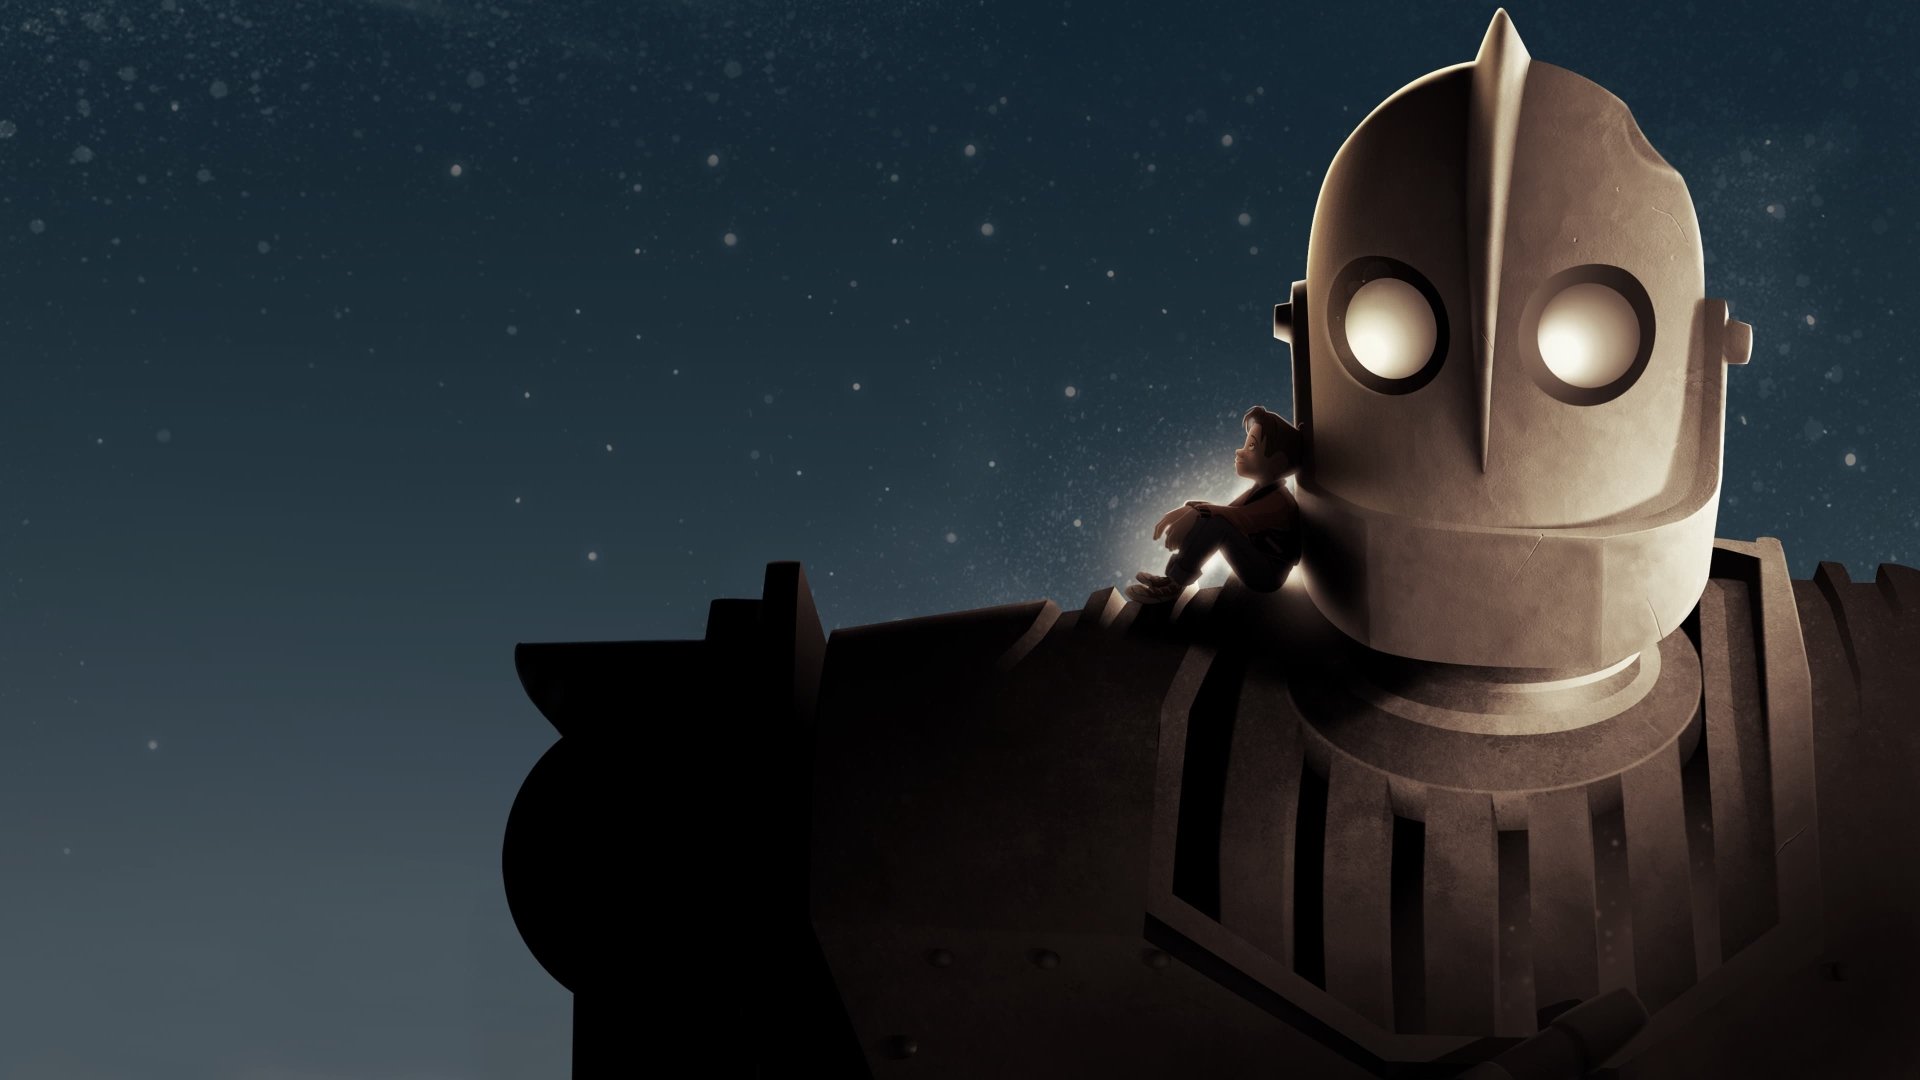 Iron Giant Wallpaper by Iconfactory on Dribbble